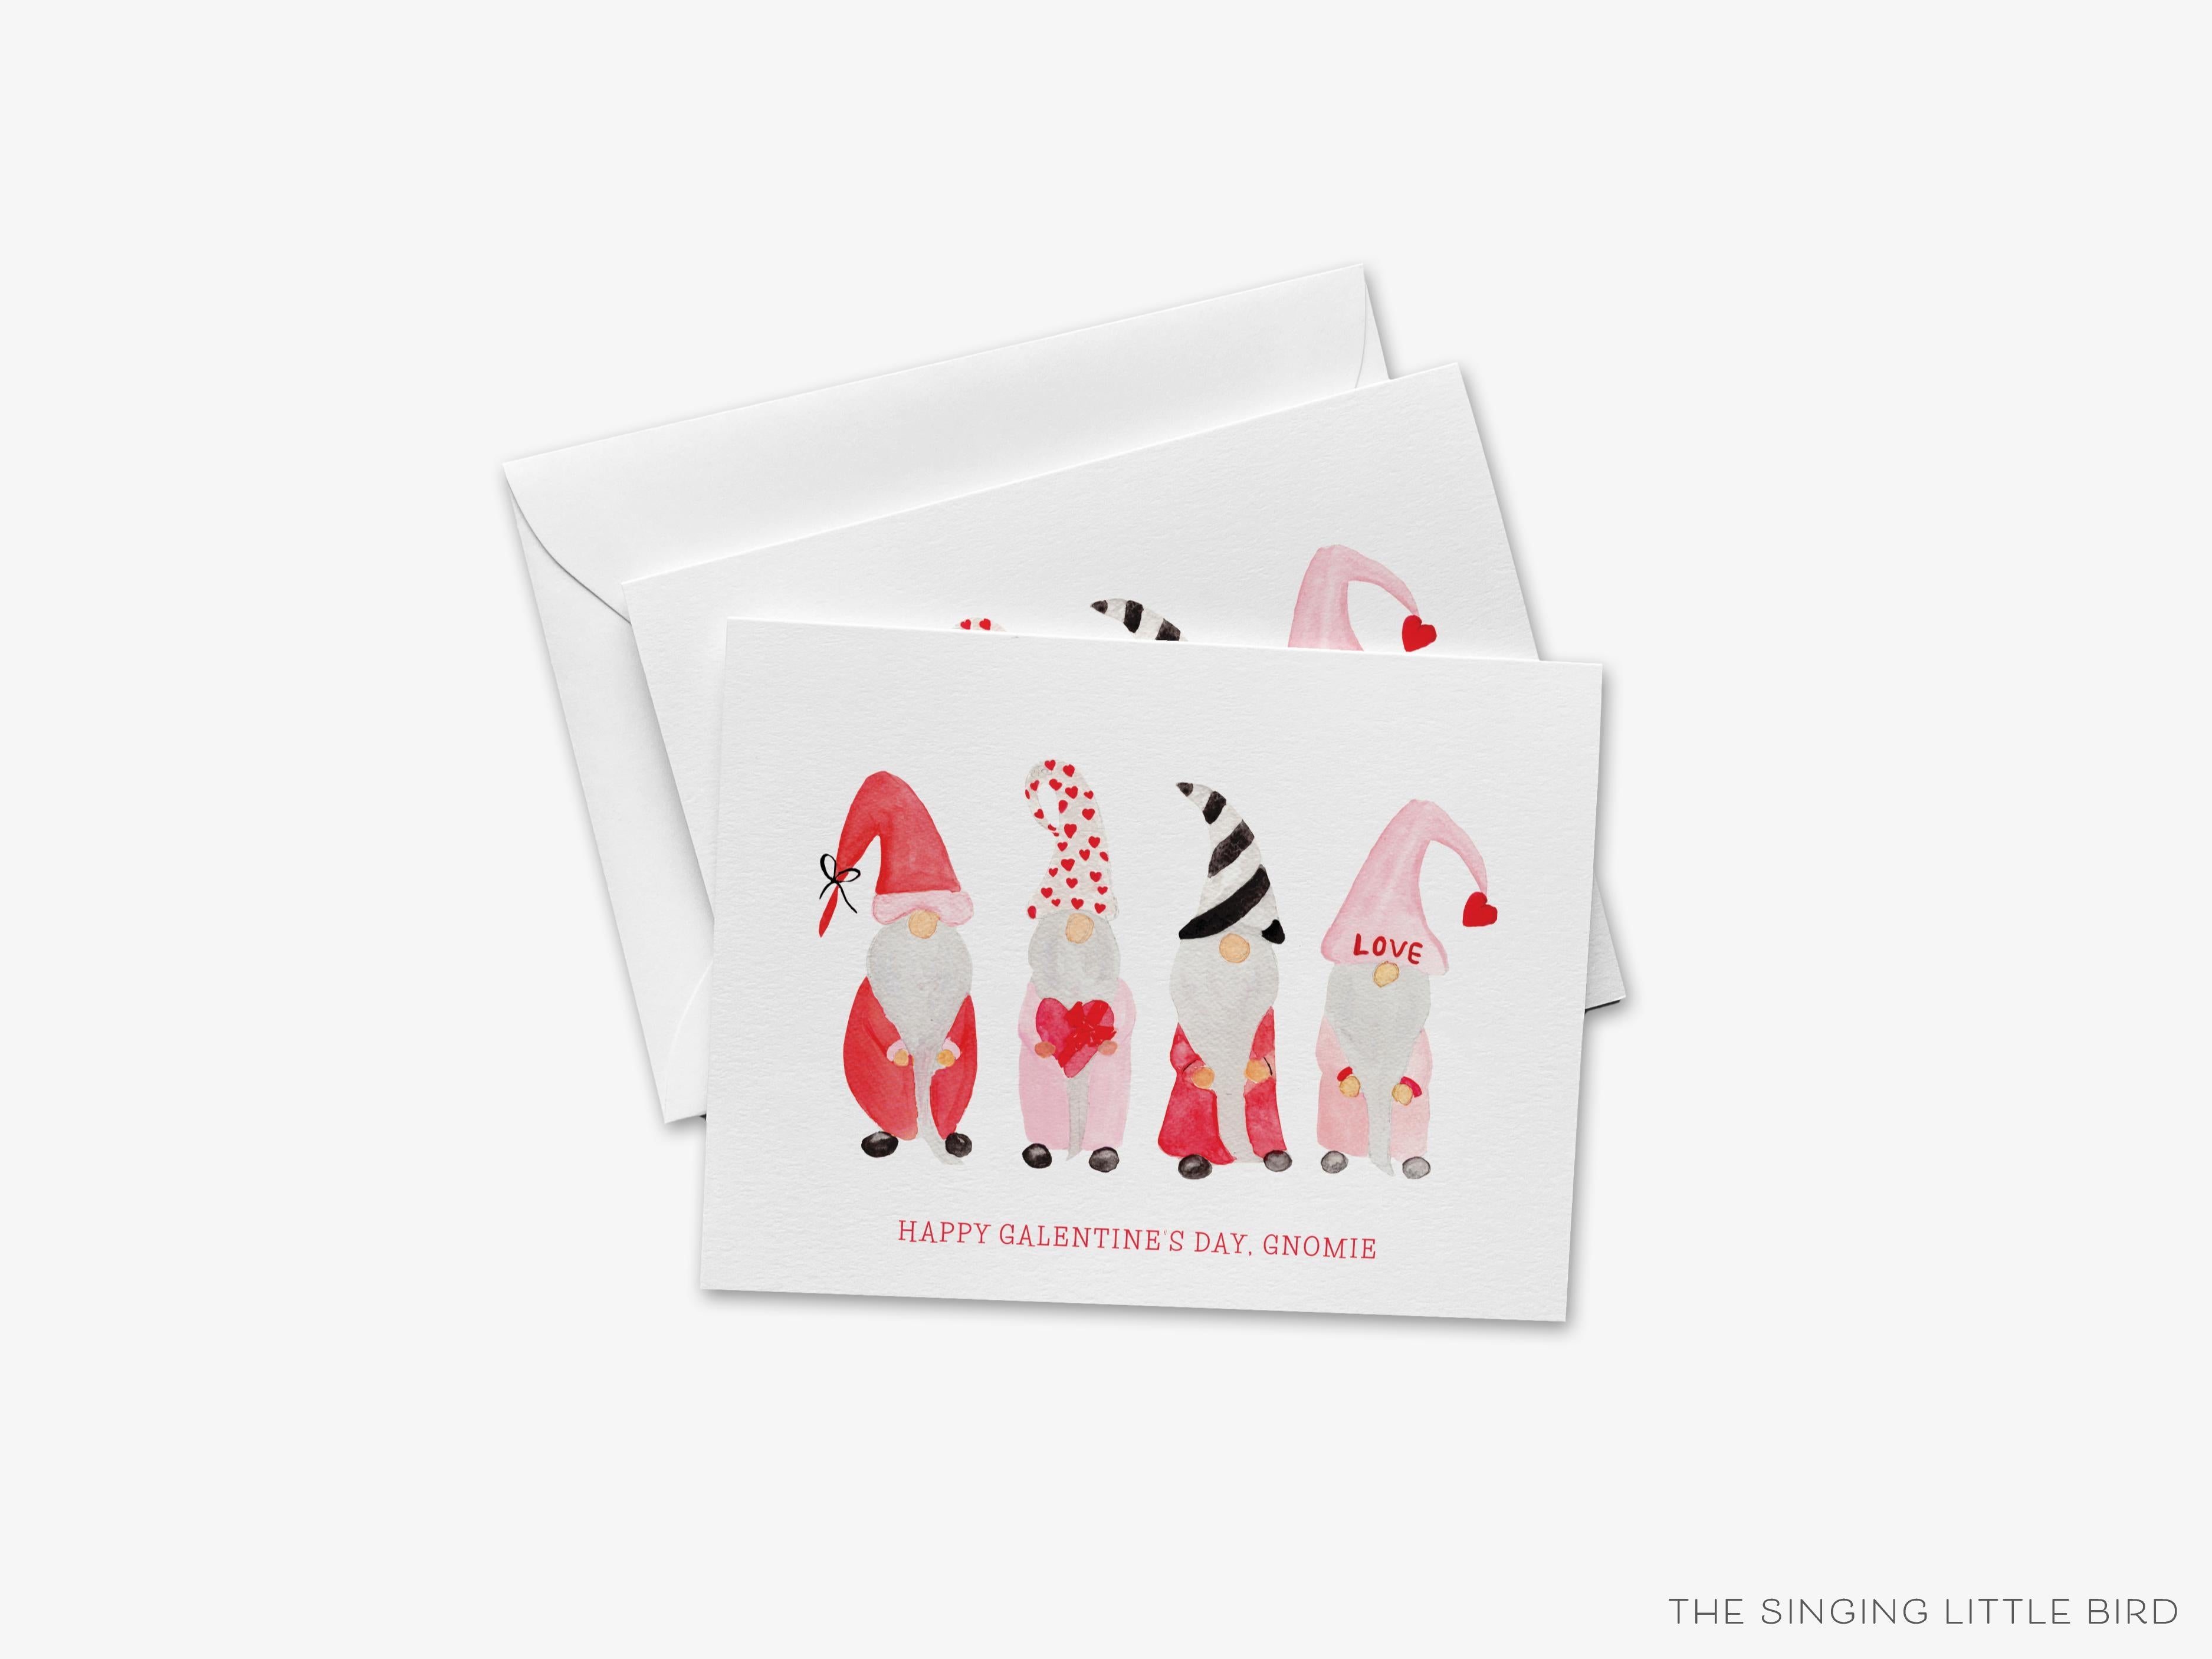 Gnome Galentine's Day Greeting Card-These folded greeting cards are 4.25x5.5 and feature our hand-painted gnomes, printed in the USA on 100lb textured stock. They come with a White envelope and make a great Galentine's Day card for the gal pal in your life.-The Singing Little Bird